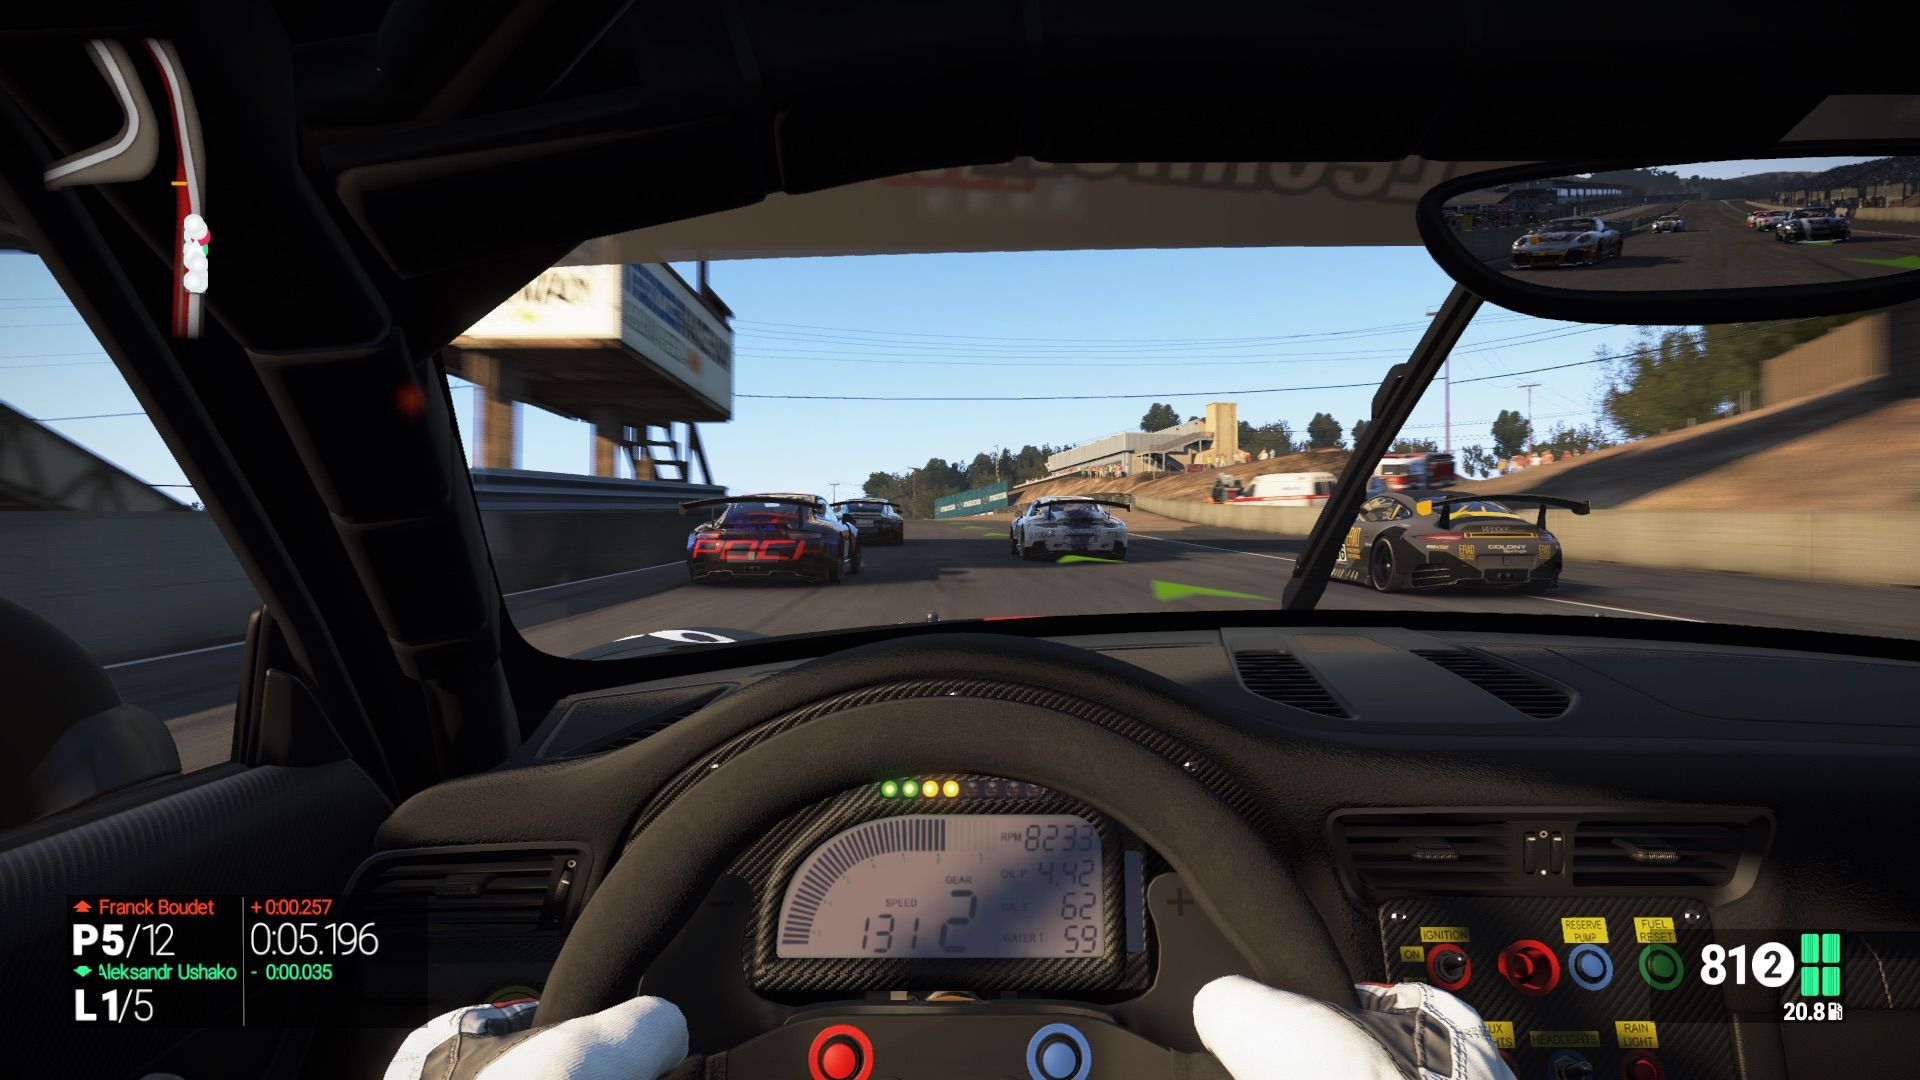 Project Cars review